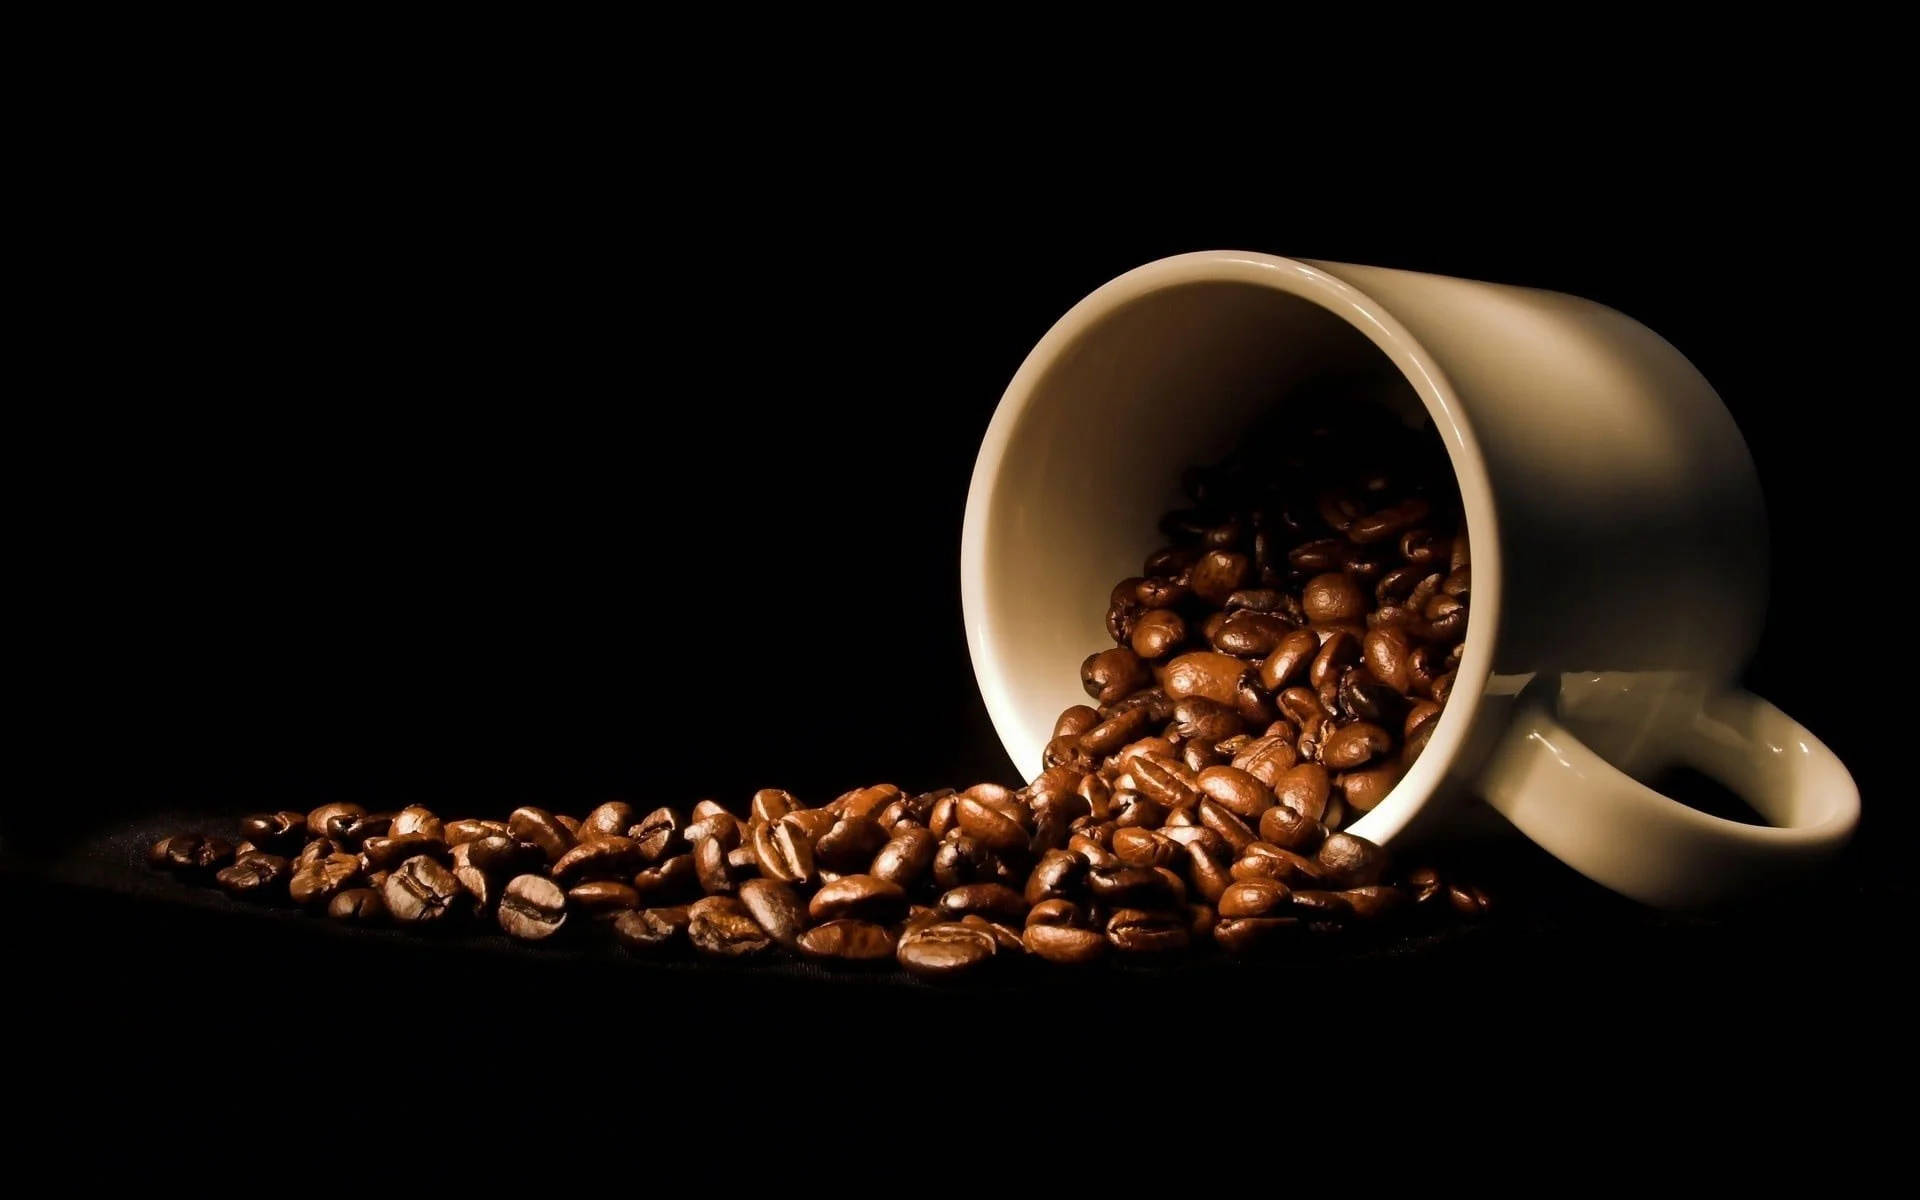 Spilled Coffee Aesthetic Beans Wallpaper